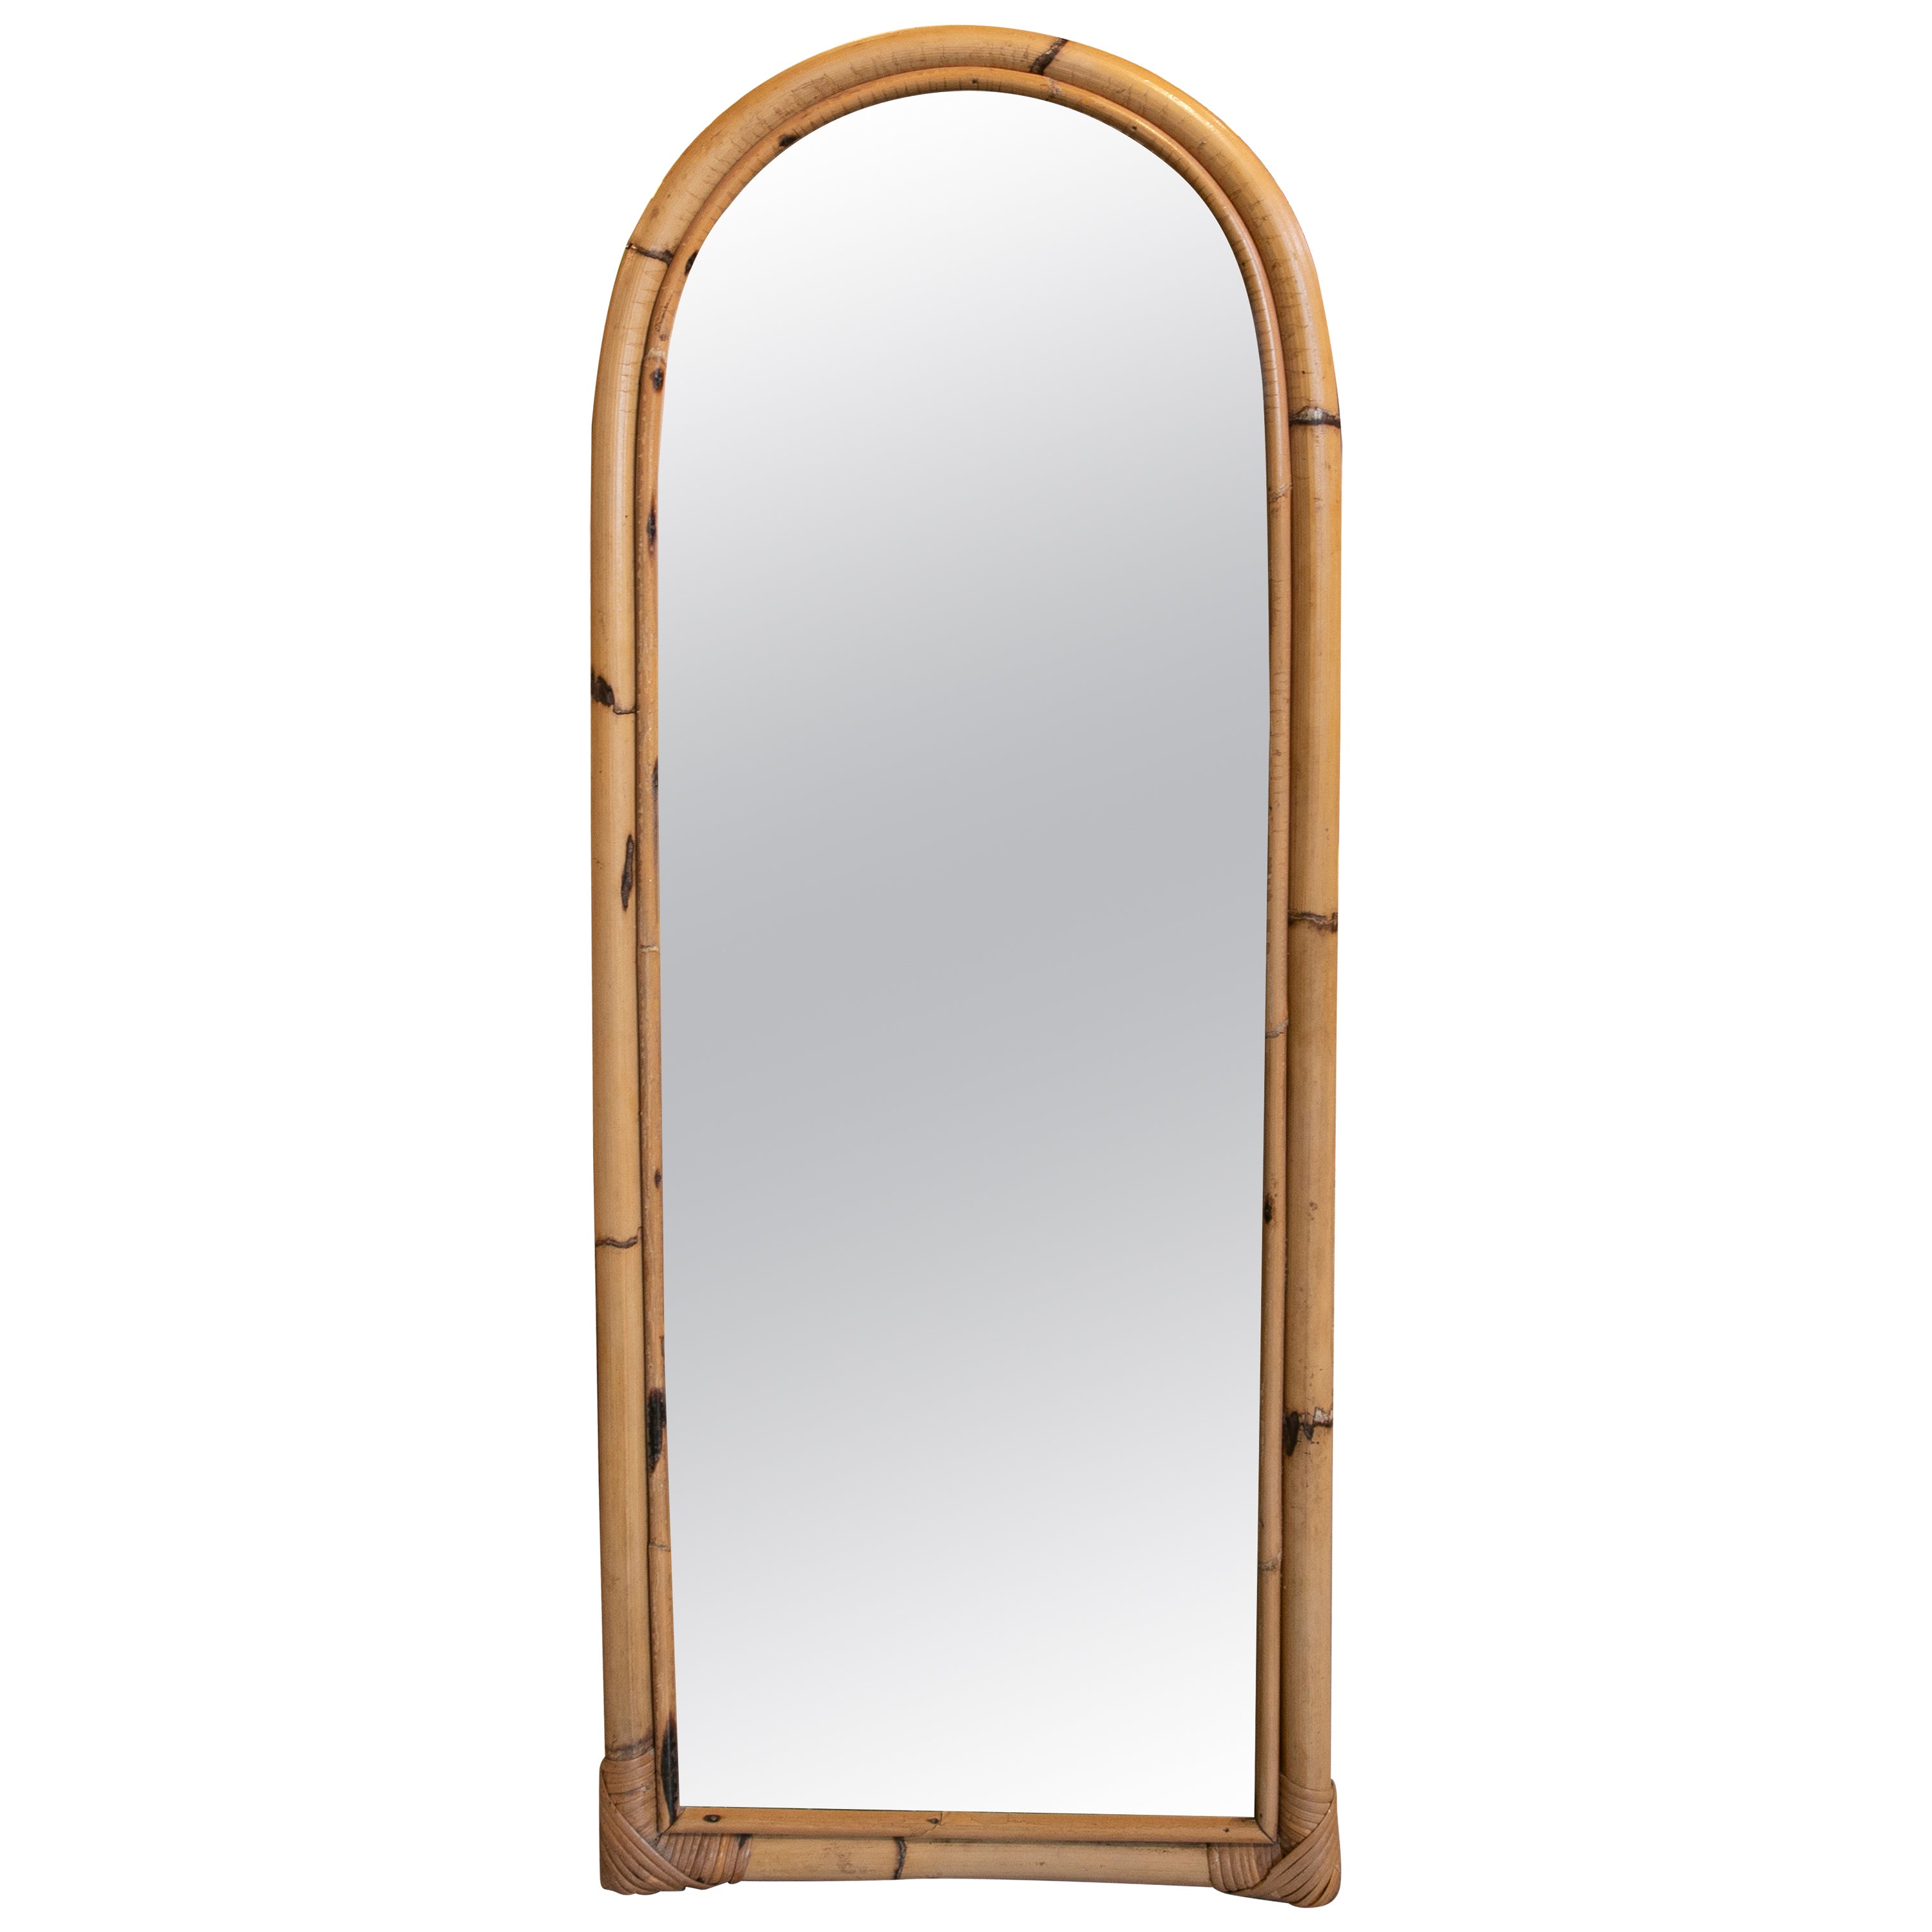 1970s Bamboo Wall Mirror with Rounded Top